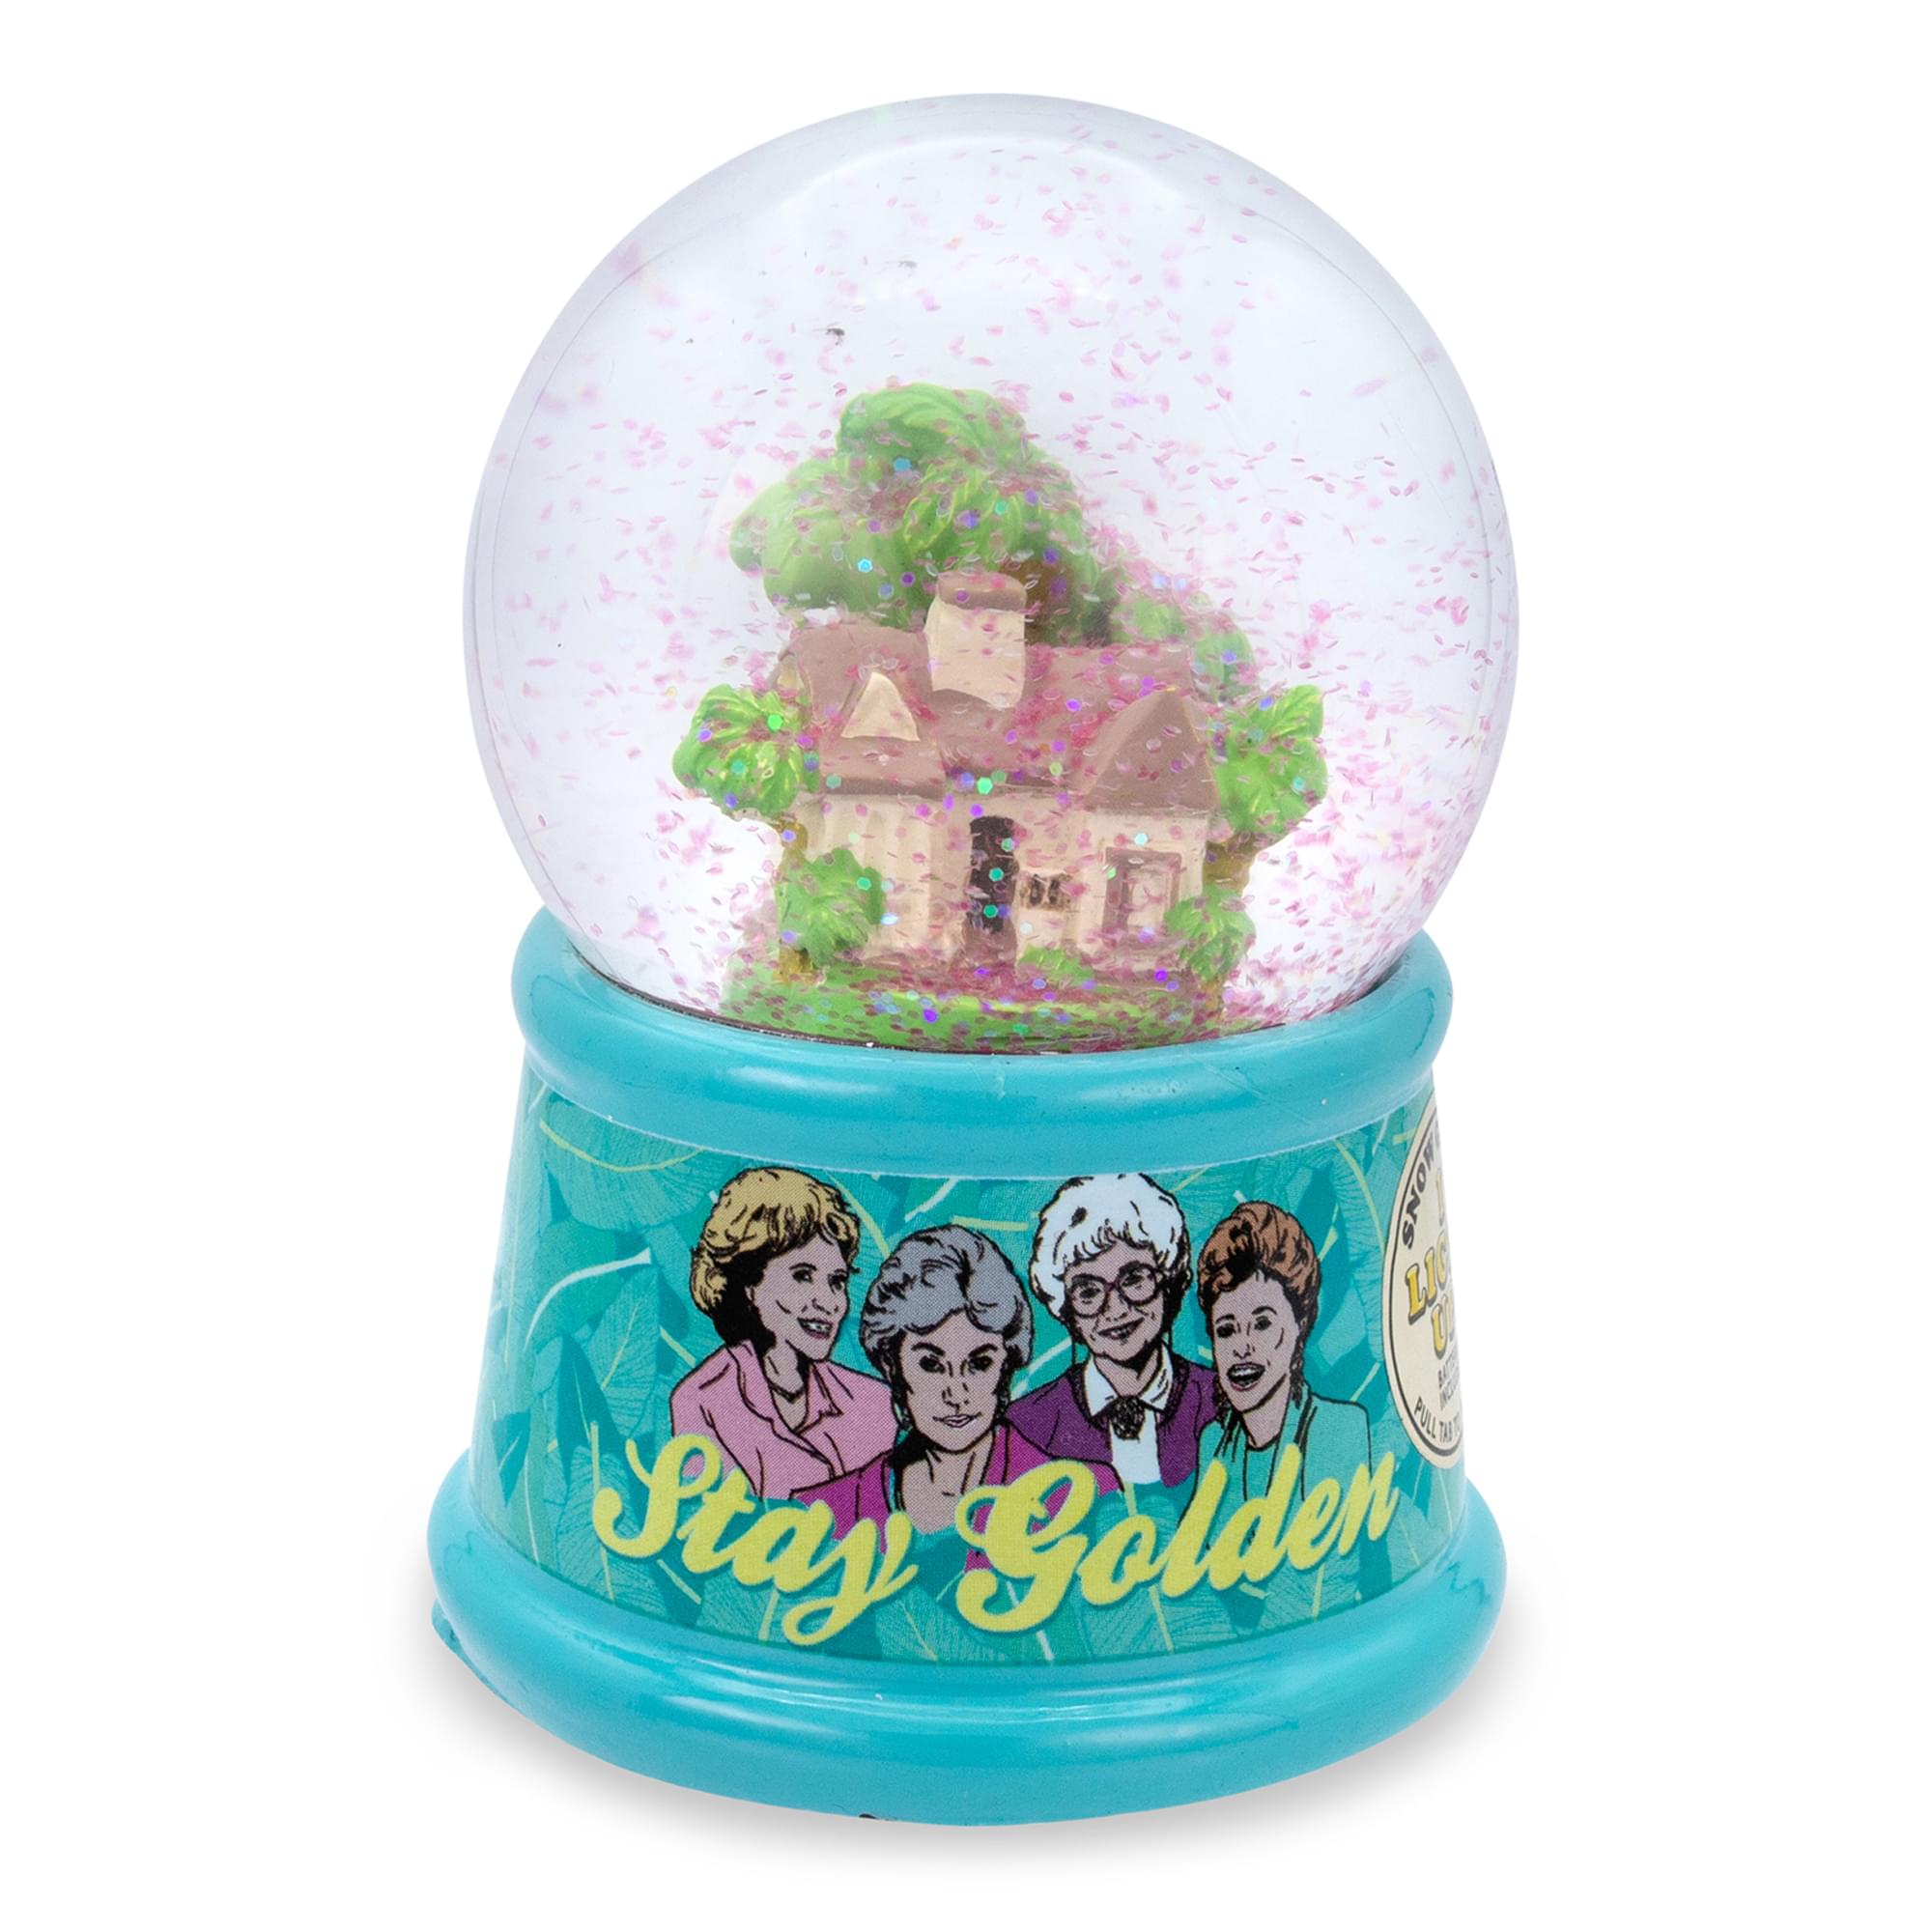 The Golden Girls Shady Pines Light-Up Mini Snow Globe , 2 Inches Tall